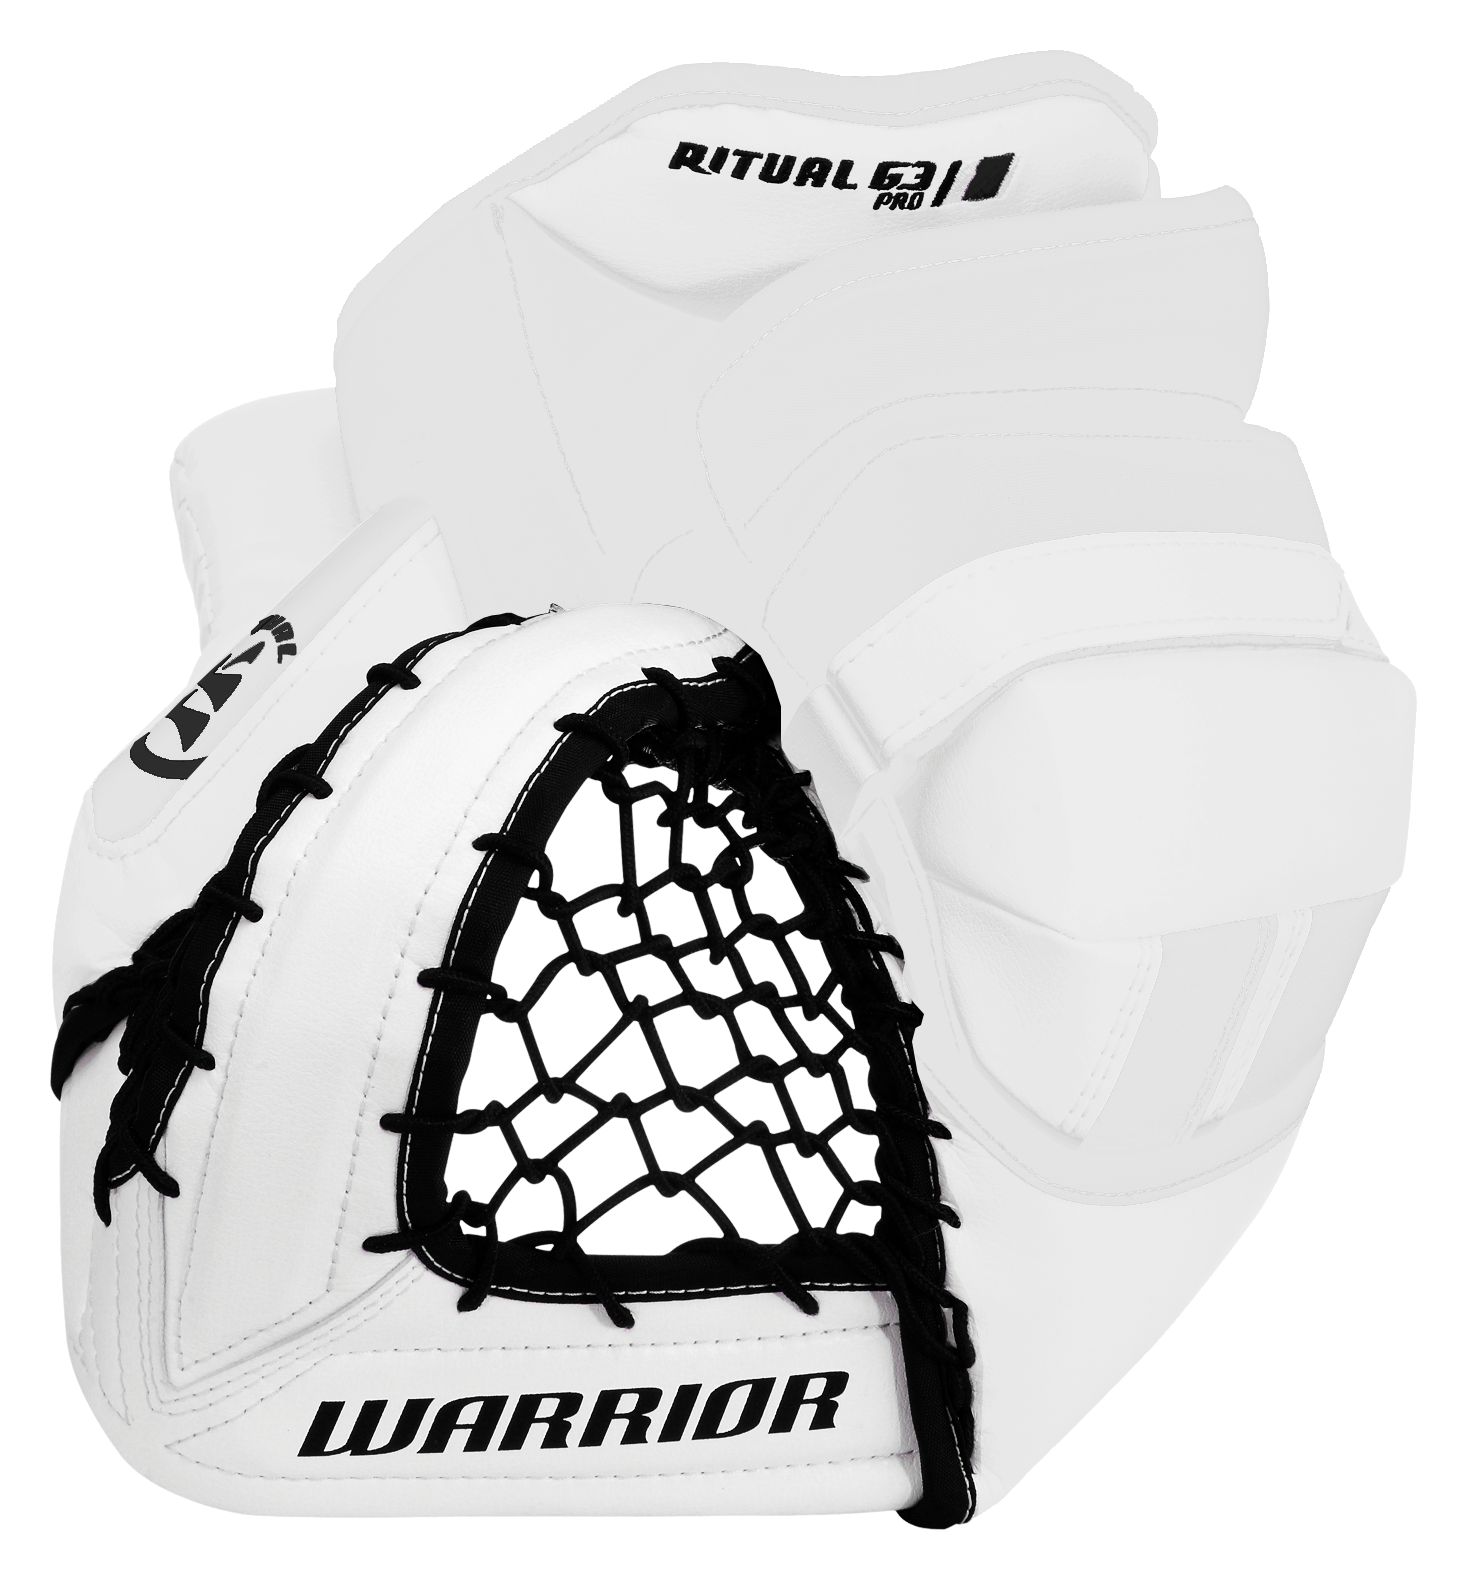 Ritual G3 Pro Trapper, White image number 1